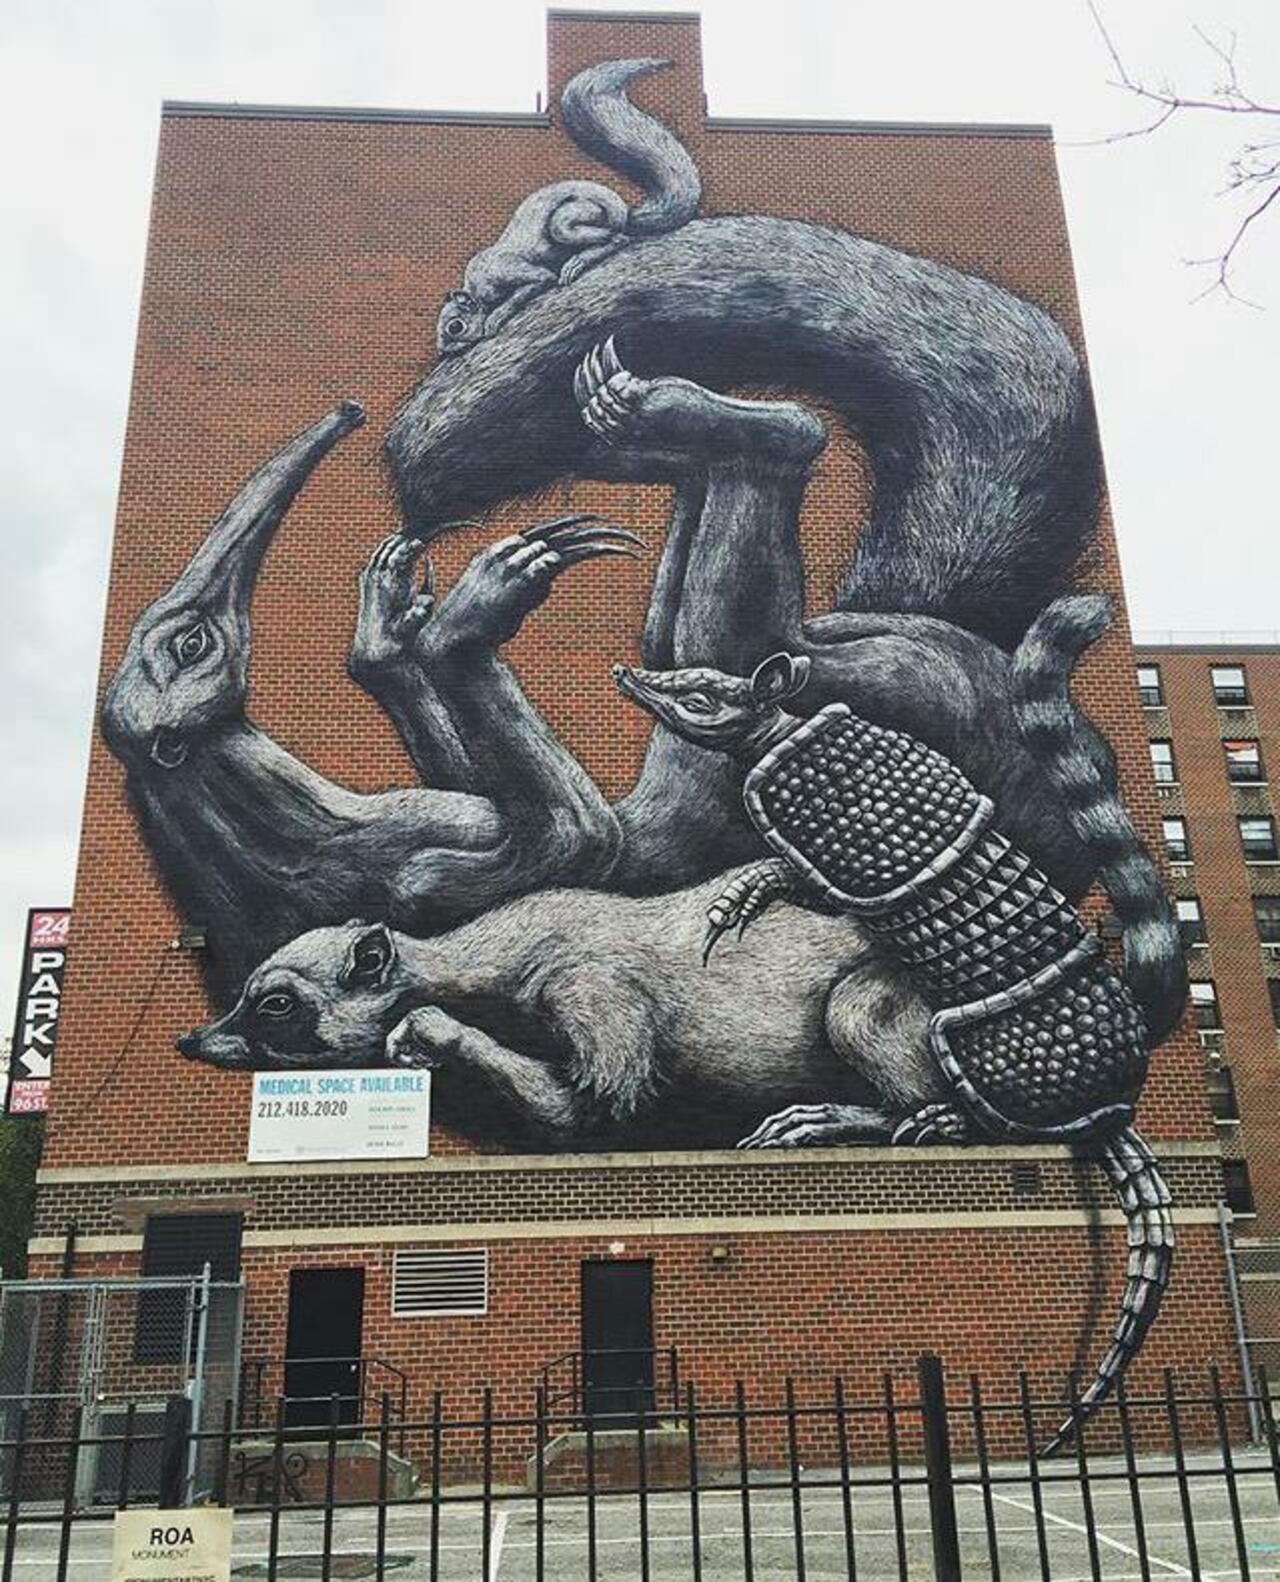 The completed new large scale Street Art wall by ROA in NYC

#art #graffiti #mural #streetart http://t.co/Vh9T1TE1Fx